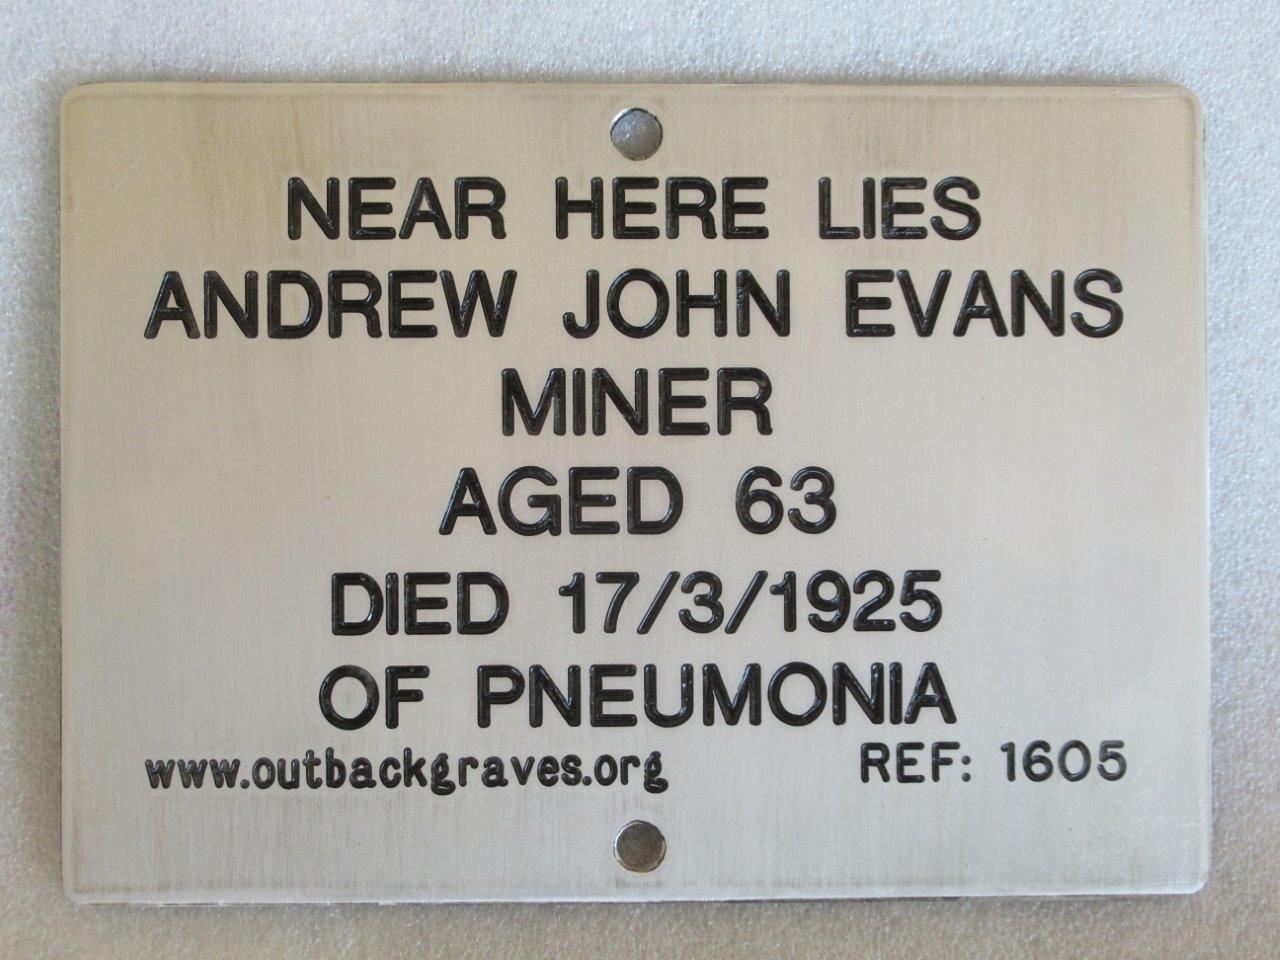 This is a photograph of plaque number 1605 for ANDREW JOHN EVANS at MULLINE